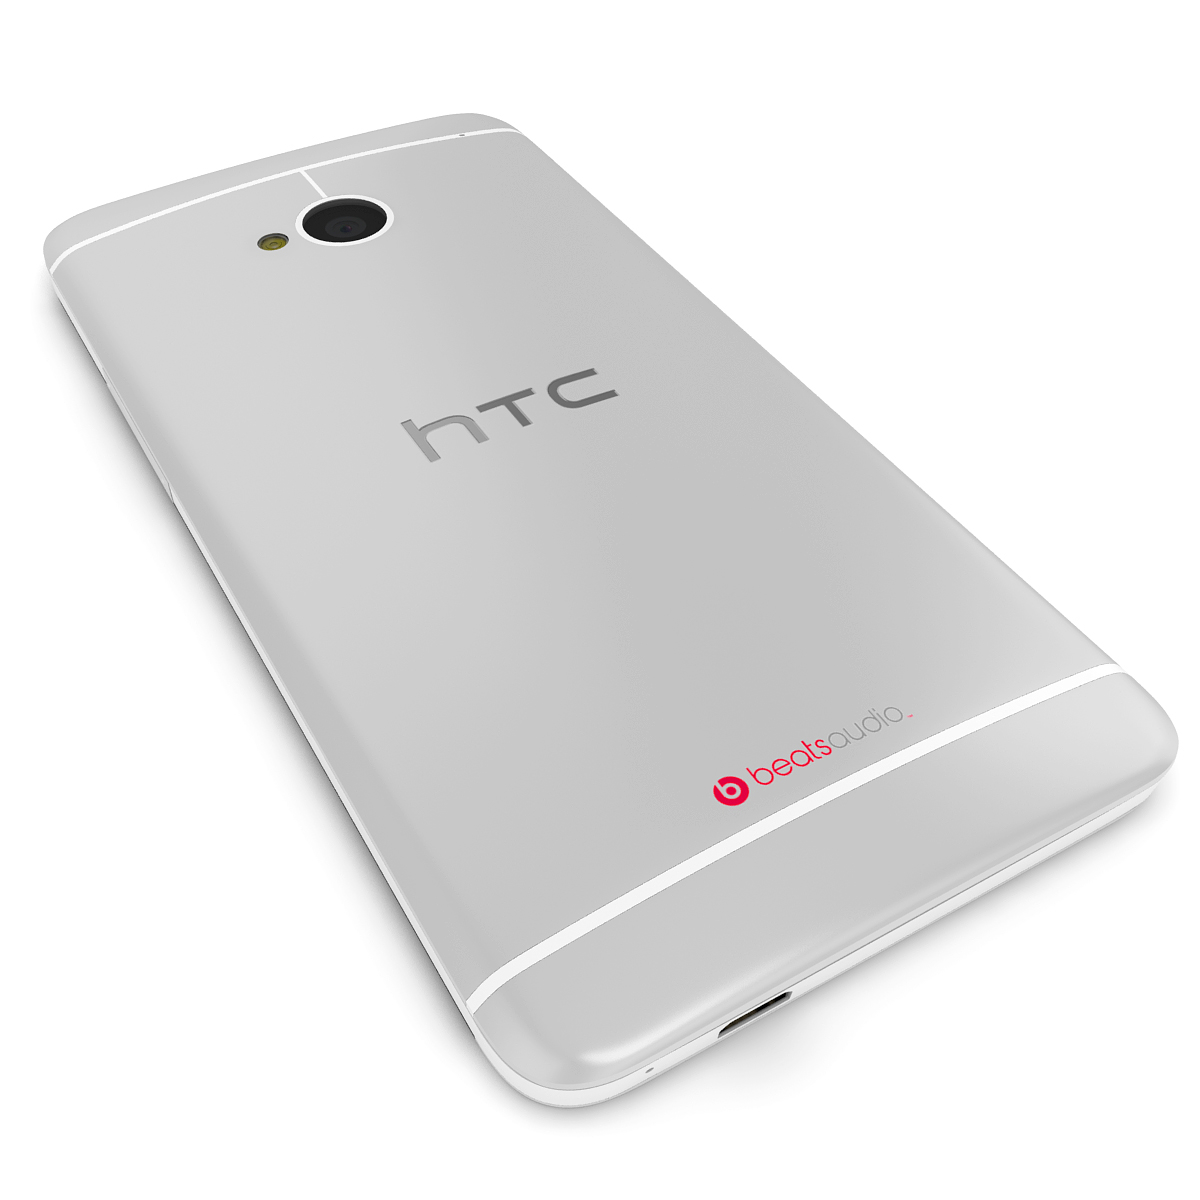 New Flagship Smartphone Htc